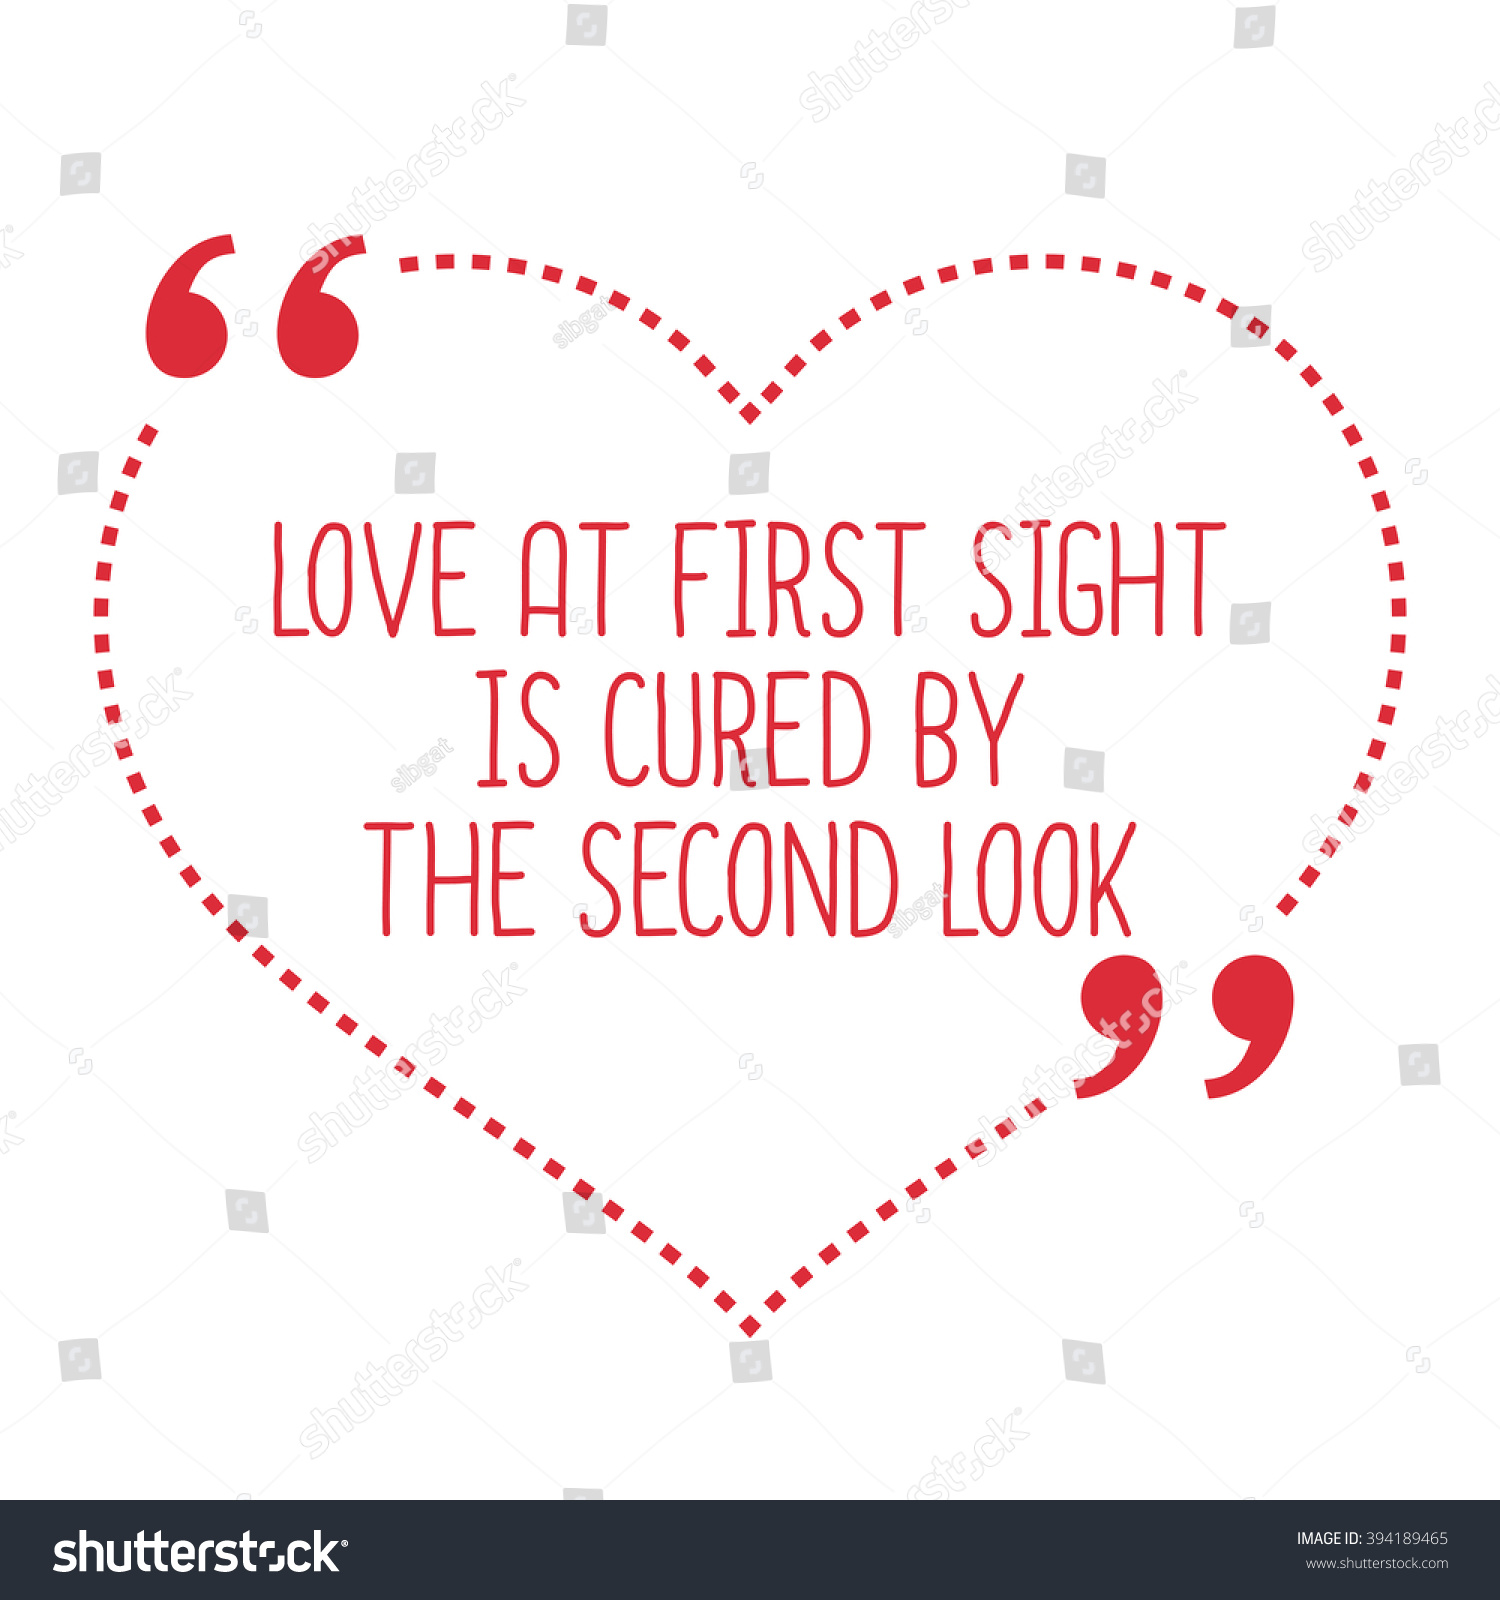 Funny love quote Love at first sight is cured by the second look Simple